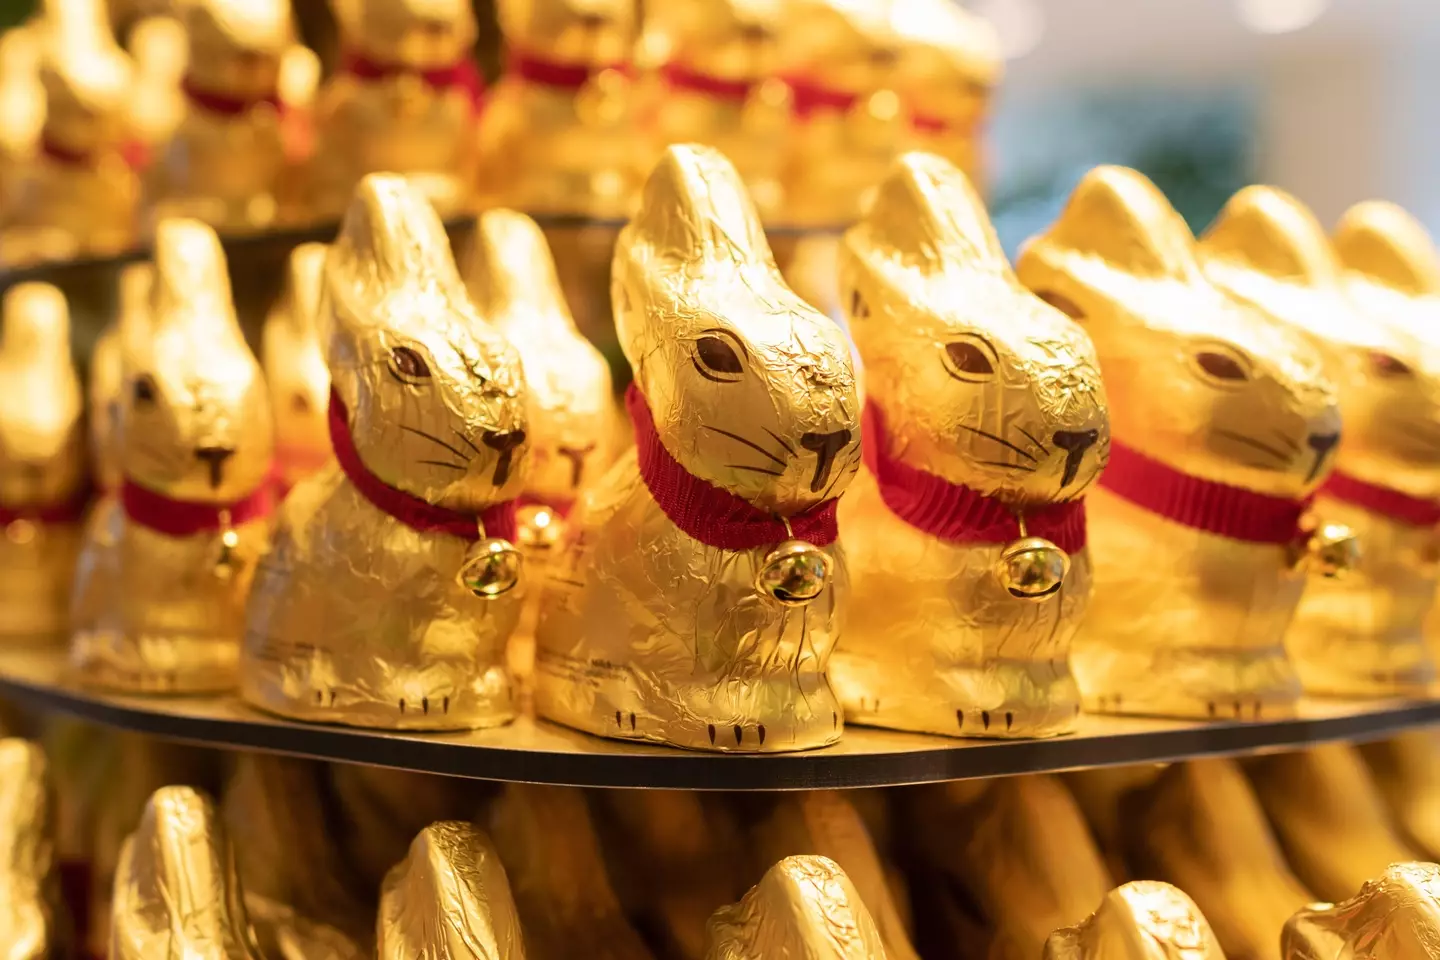 Lidl had to melt a load of its chocolate bunnies because they were too similar to Lindt's version.